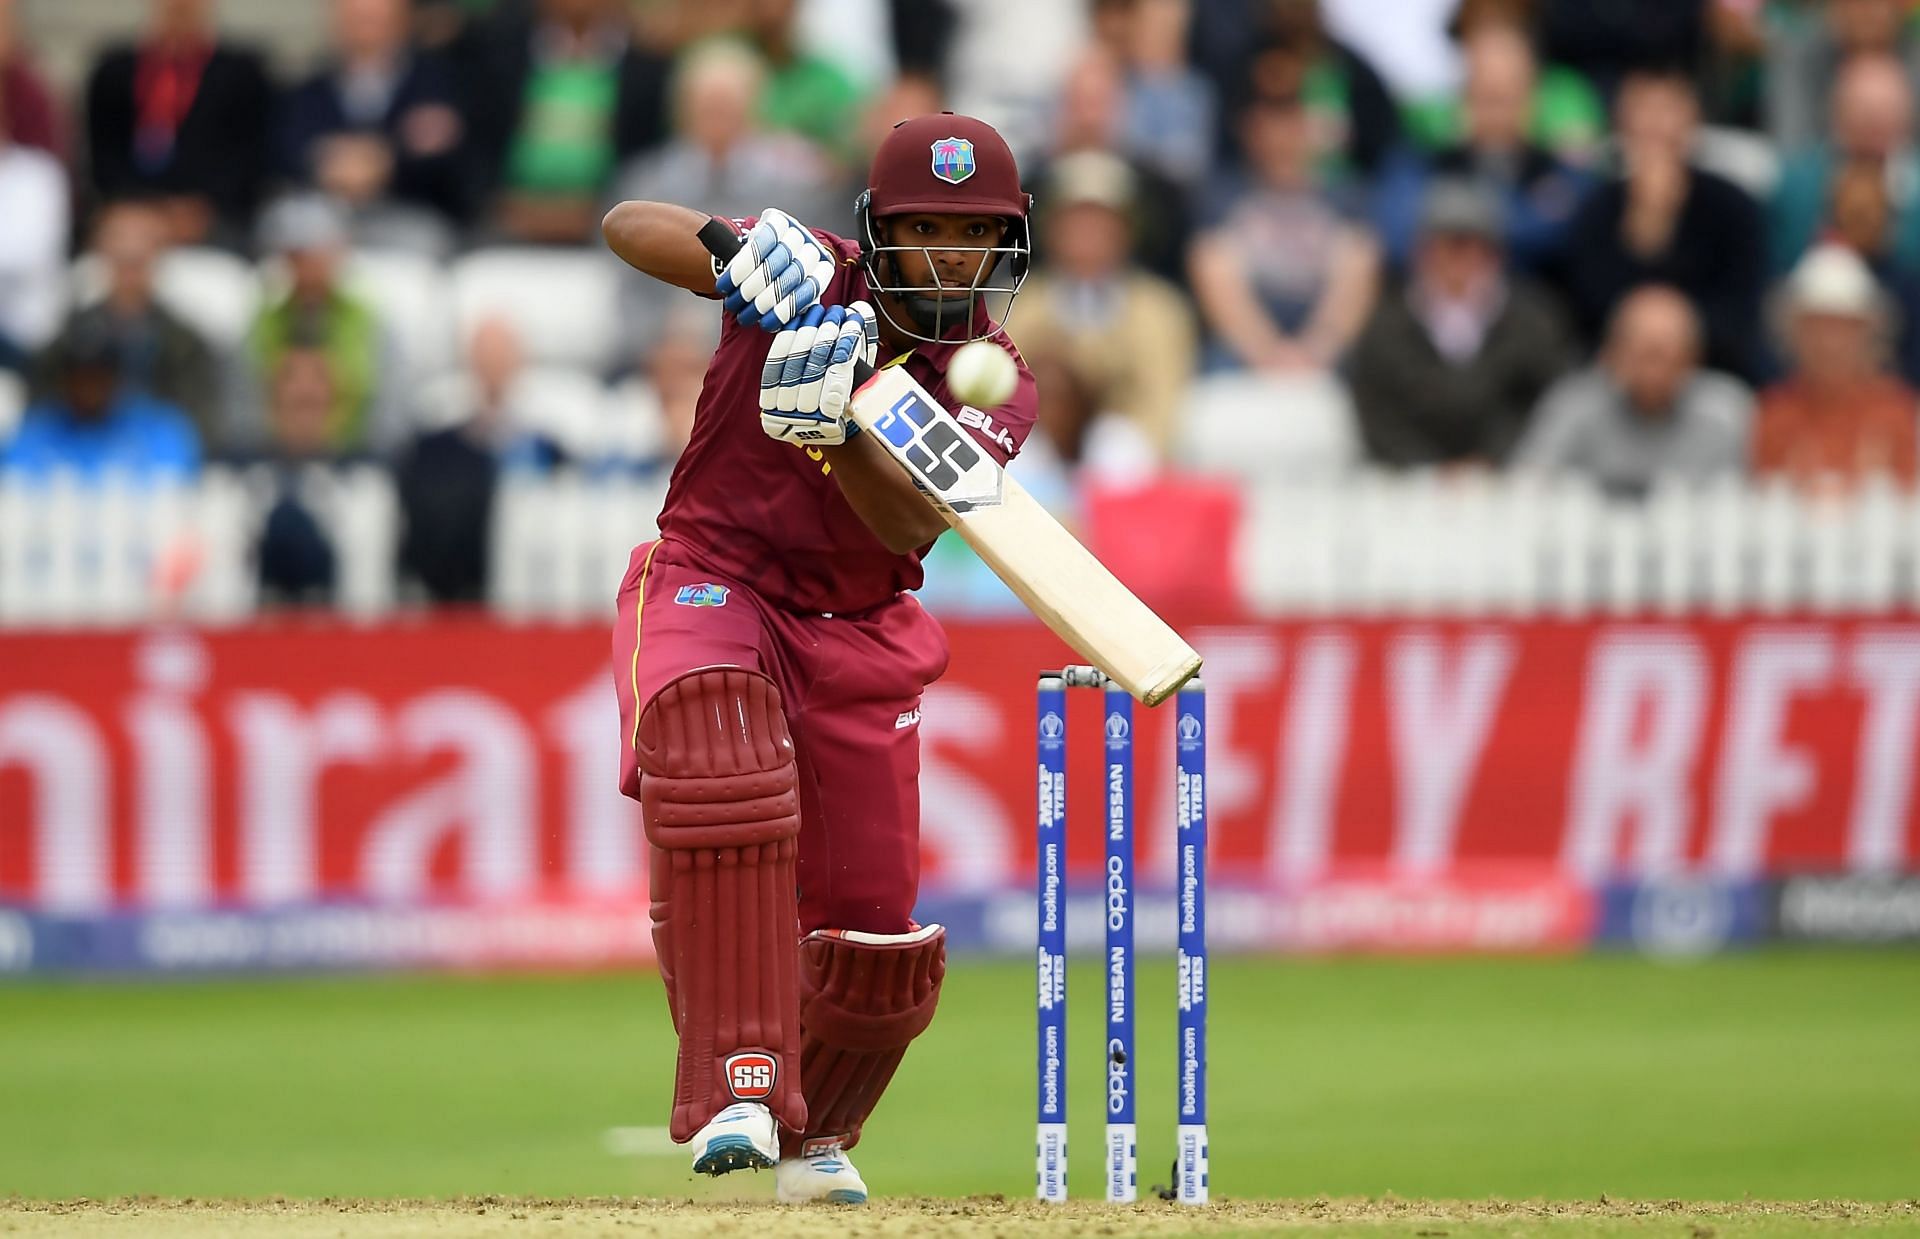 West Indies vs Ireland 3rd ODI: Probable XIs, Match Prediction, Weather Forecast, Pitch Report and Live Streaming Details